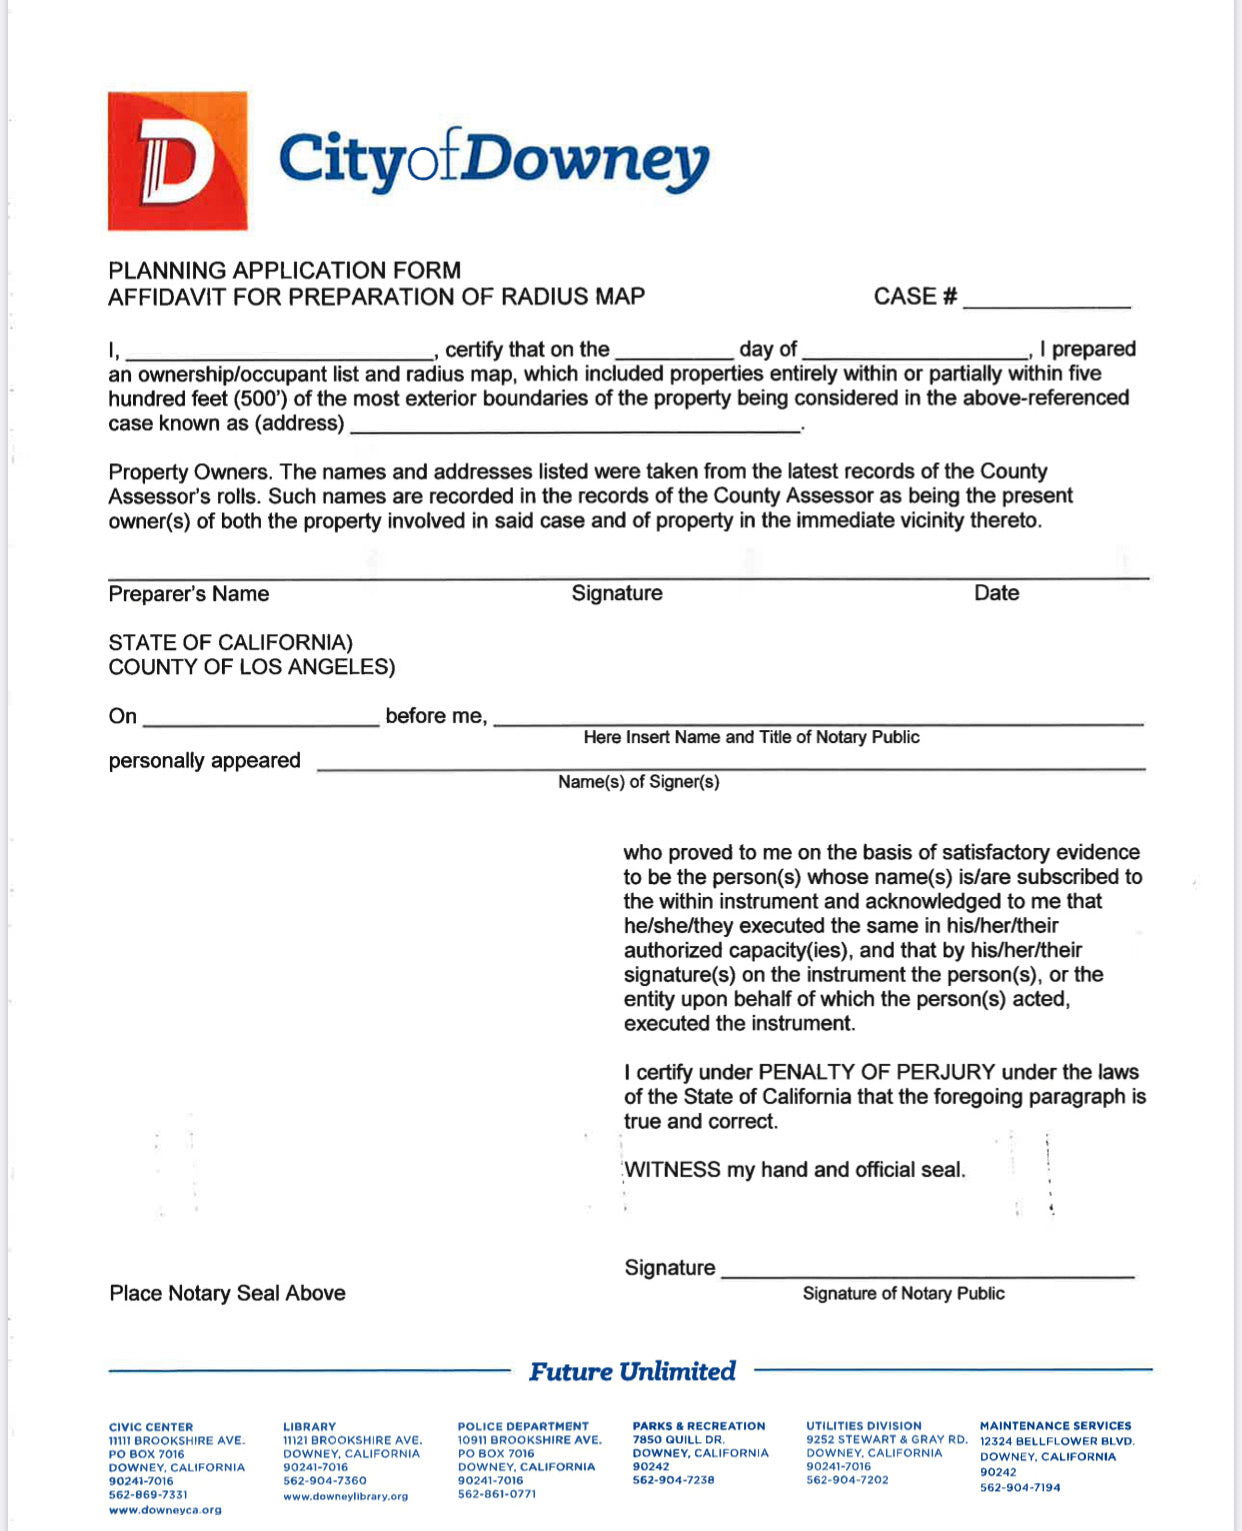 Downey - City Package